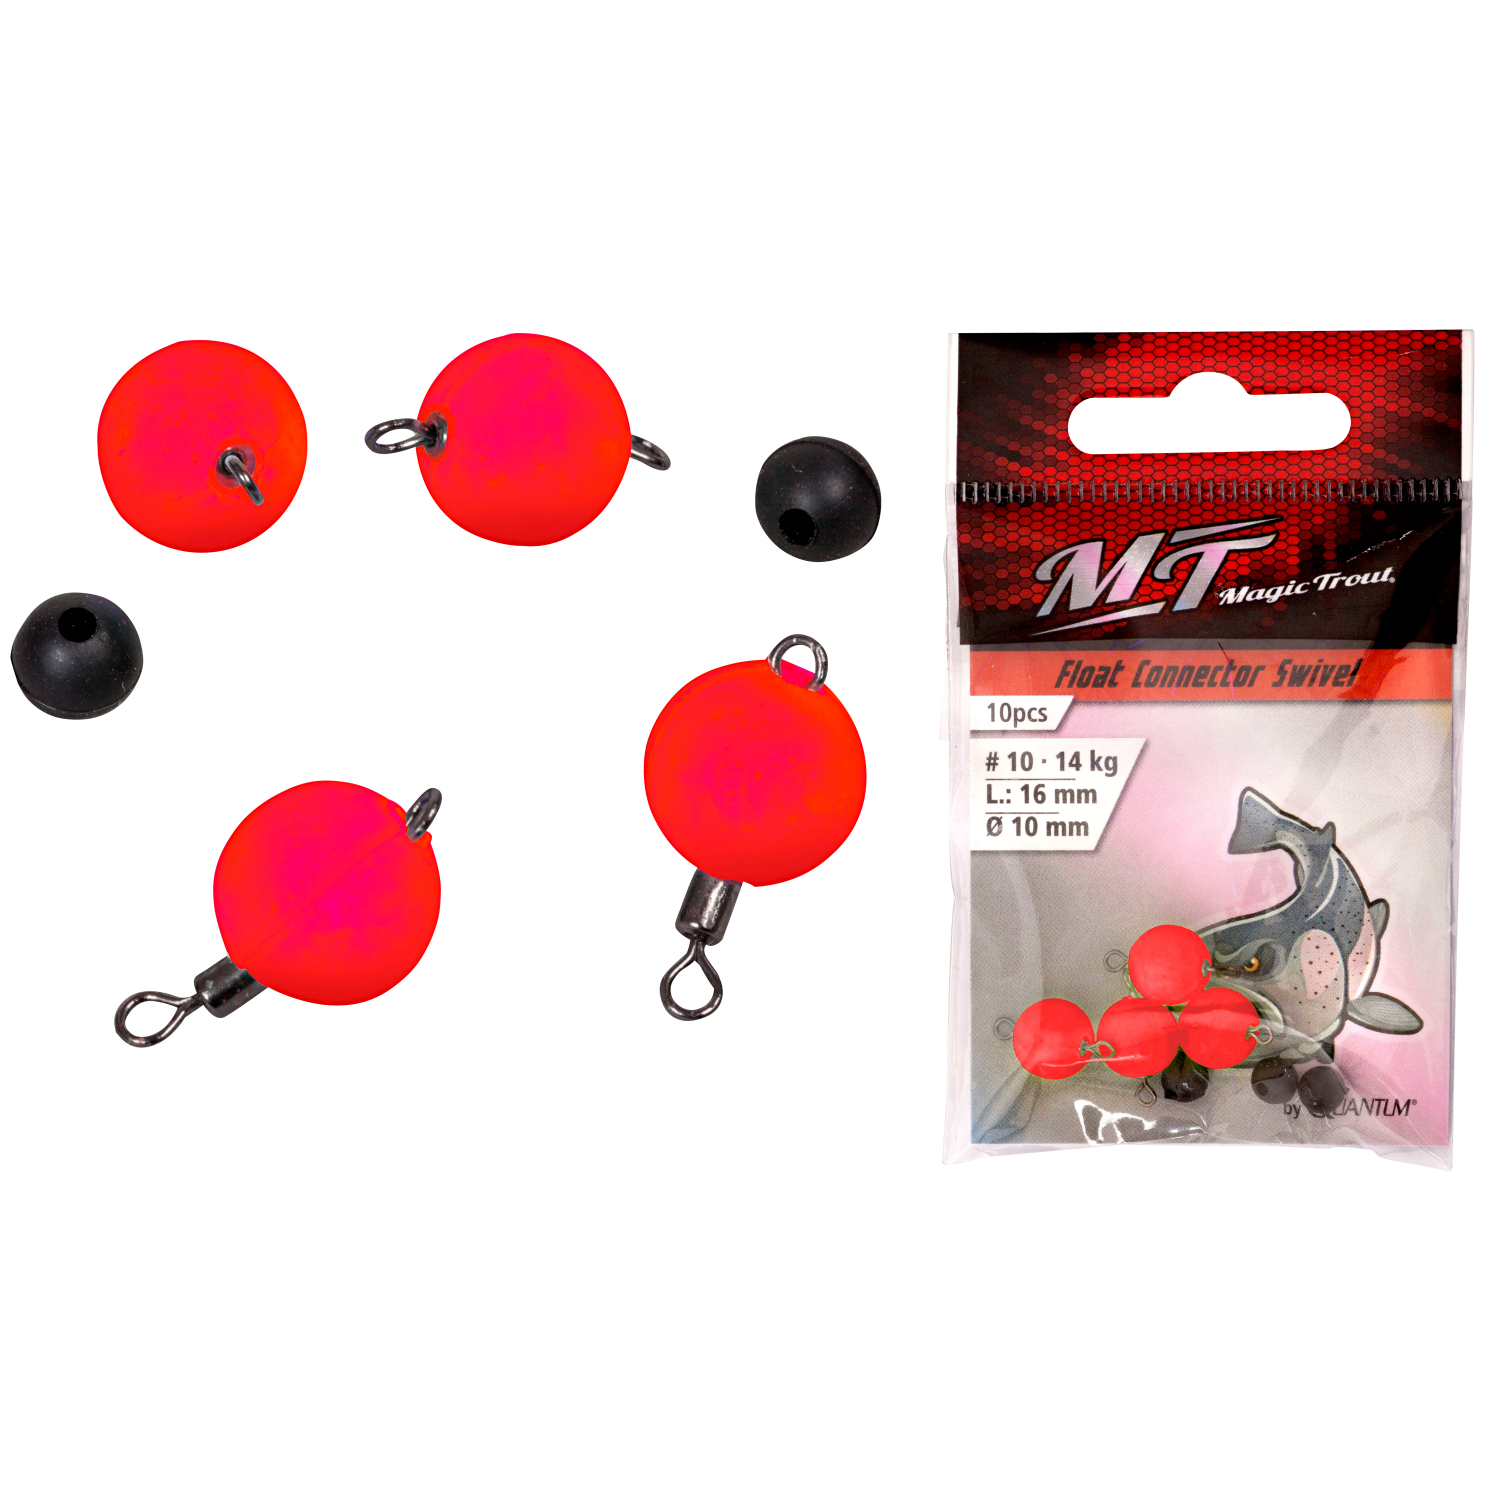 Magic Trout Float Connector Swivel (rot) 